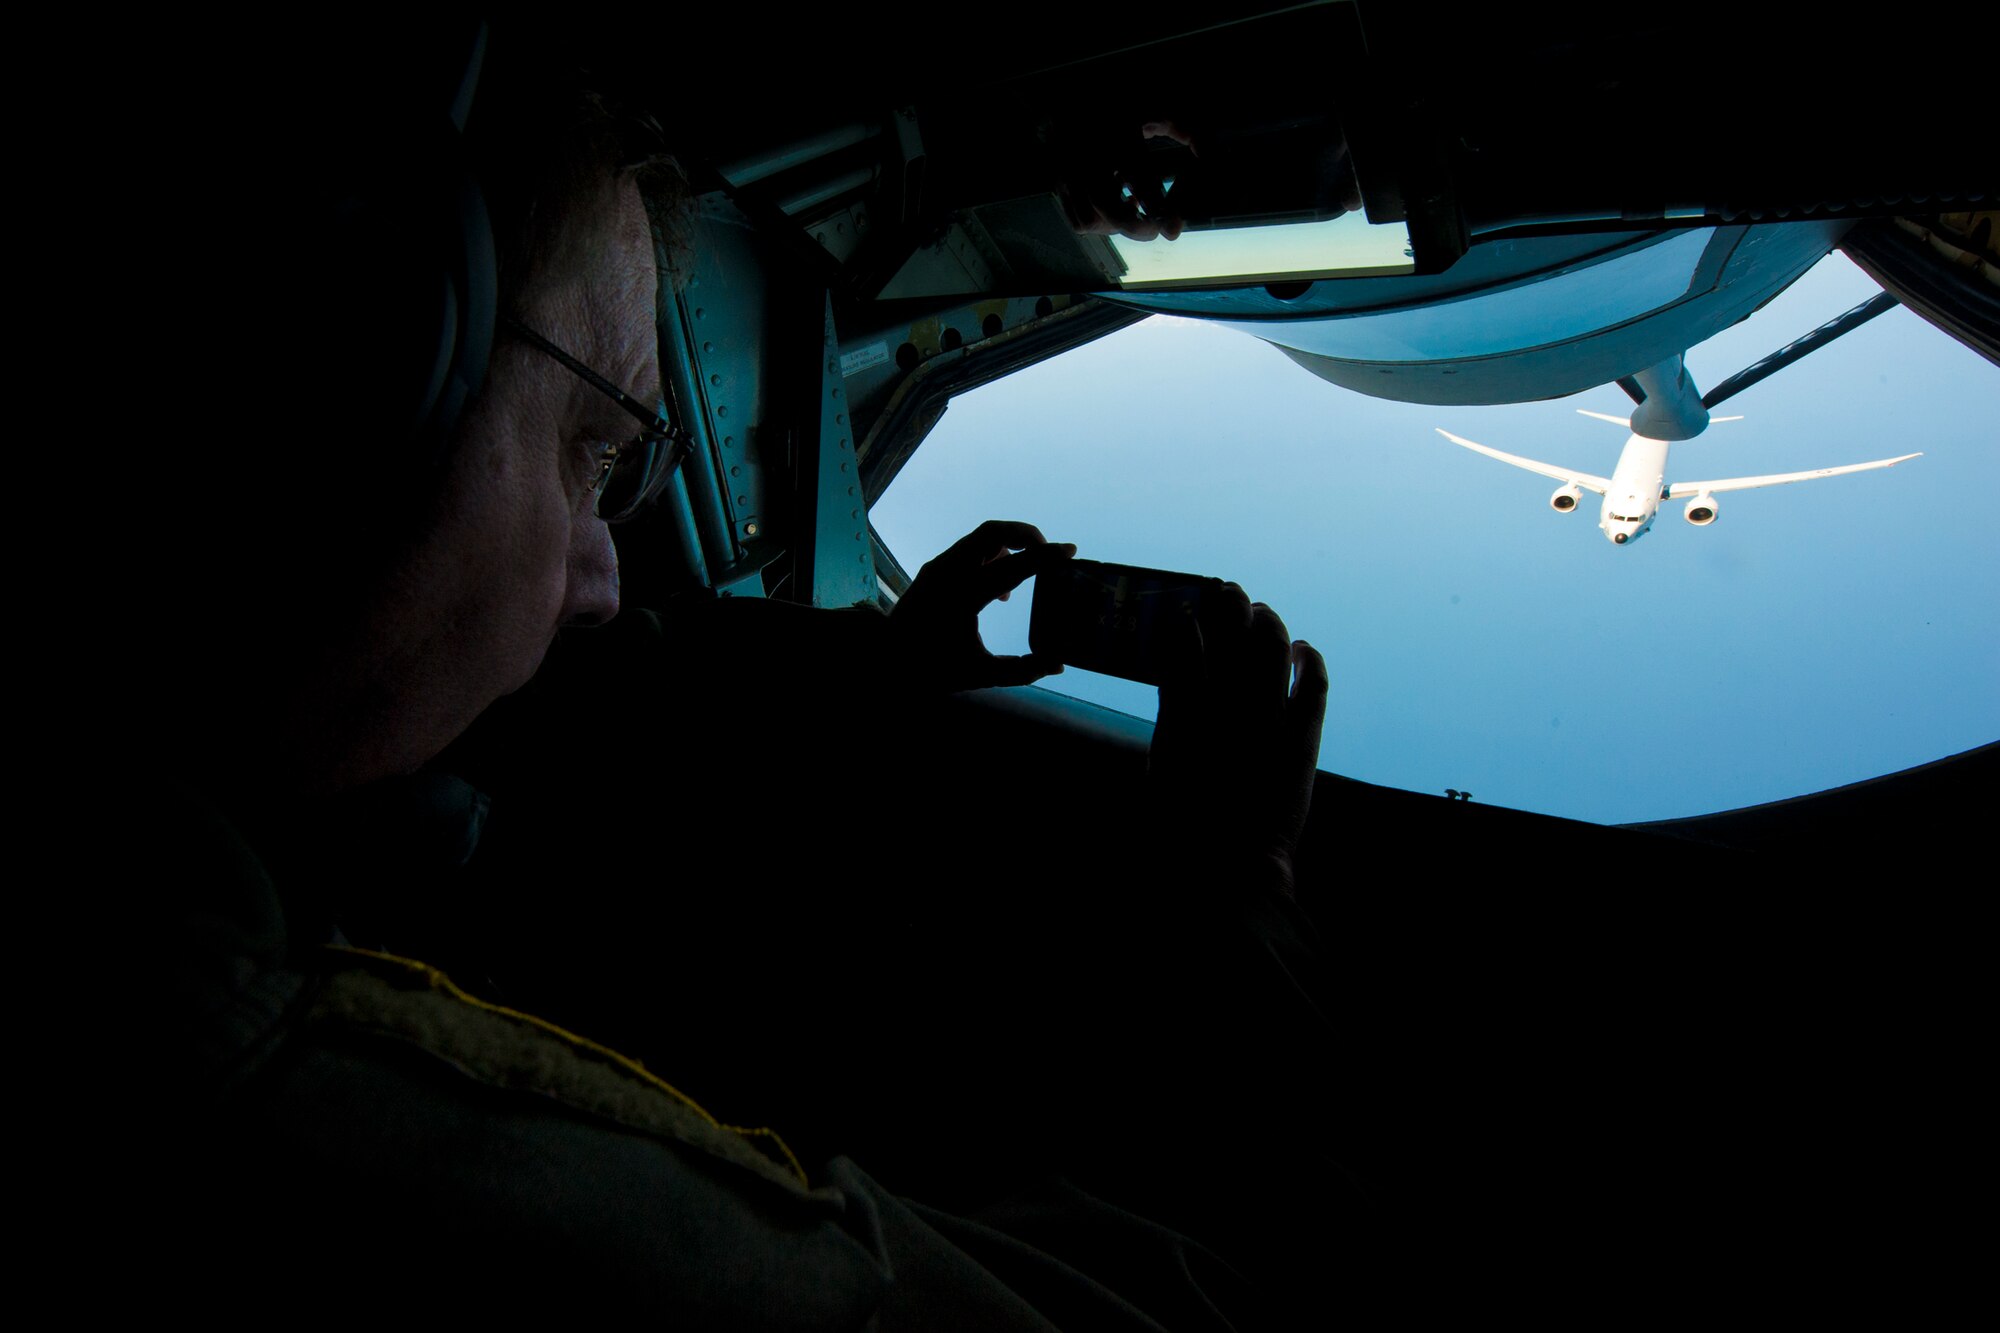 Chief Master Sgt. Frankie Rollins, 756th Refueling Squadron superintendent and boom operator, takes a picture of an incoming Naval Air Systems Command P-8A Poseidon over the Atlantic Ocean April 13, 2017. This was the first successful inflight refueling of the P-8A after a year of planning and coordination with NAVAIR. (U.S. Air Force photo/Tech. Sgt. Kat Justen)